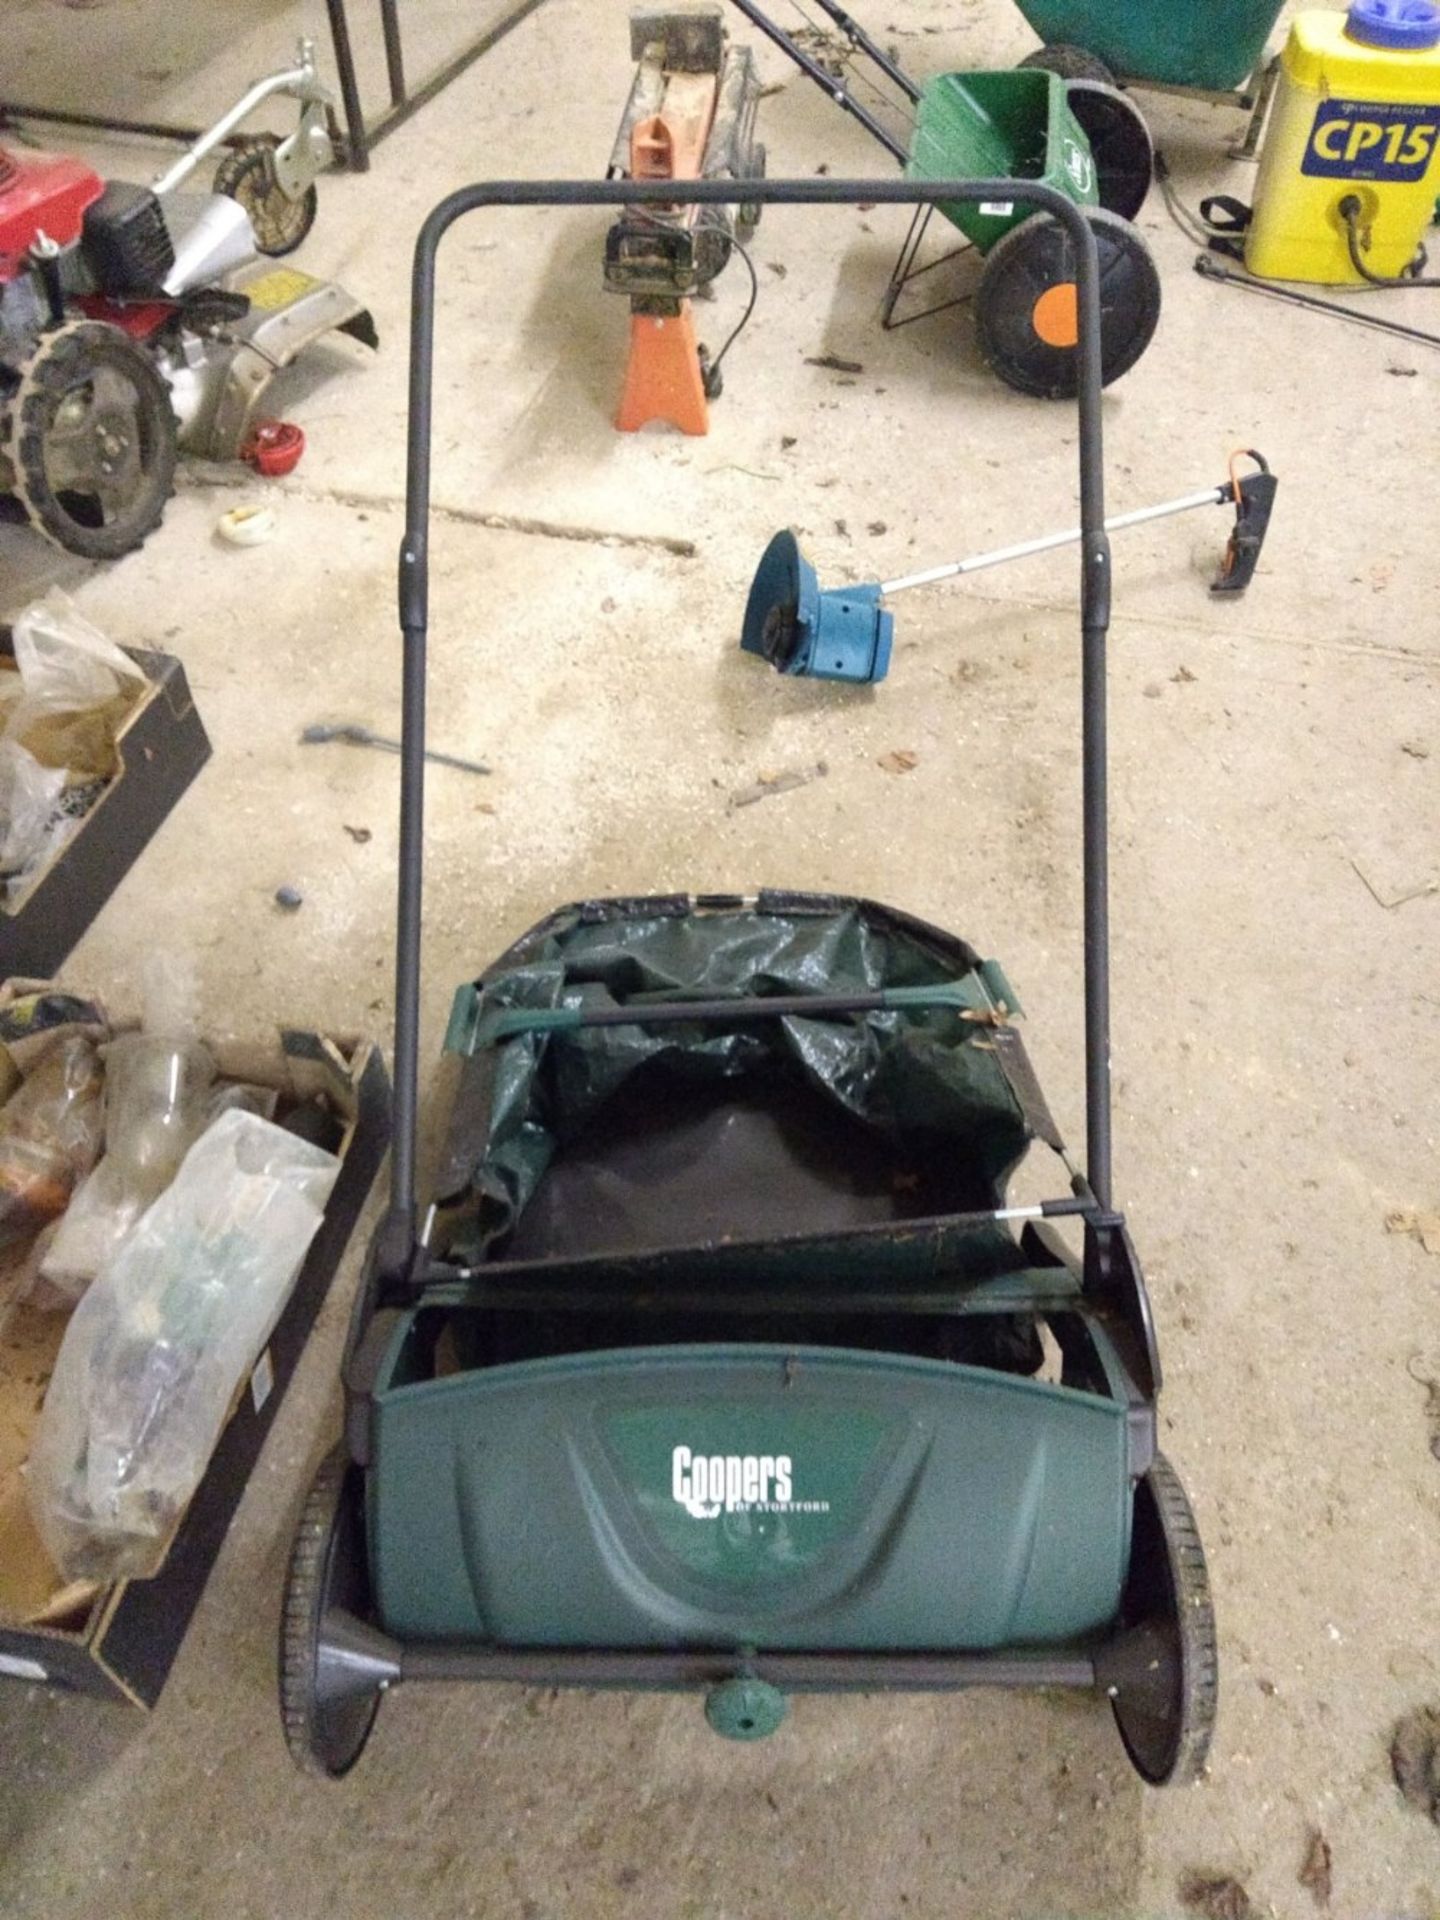 Coopers Leaf/Lawn sweeper